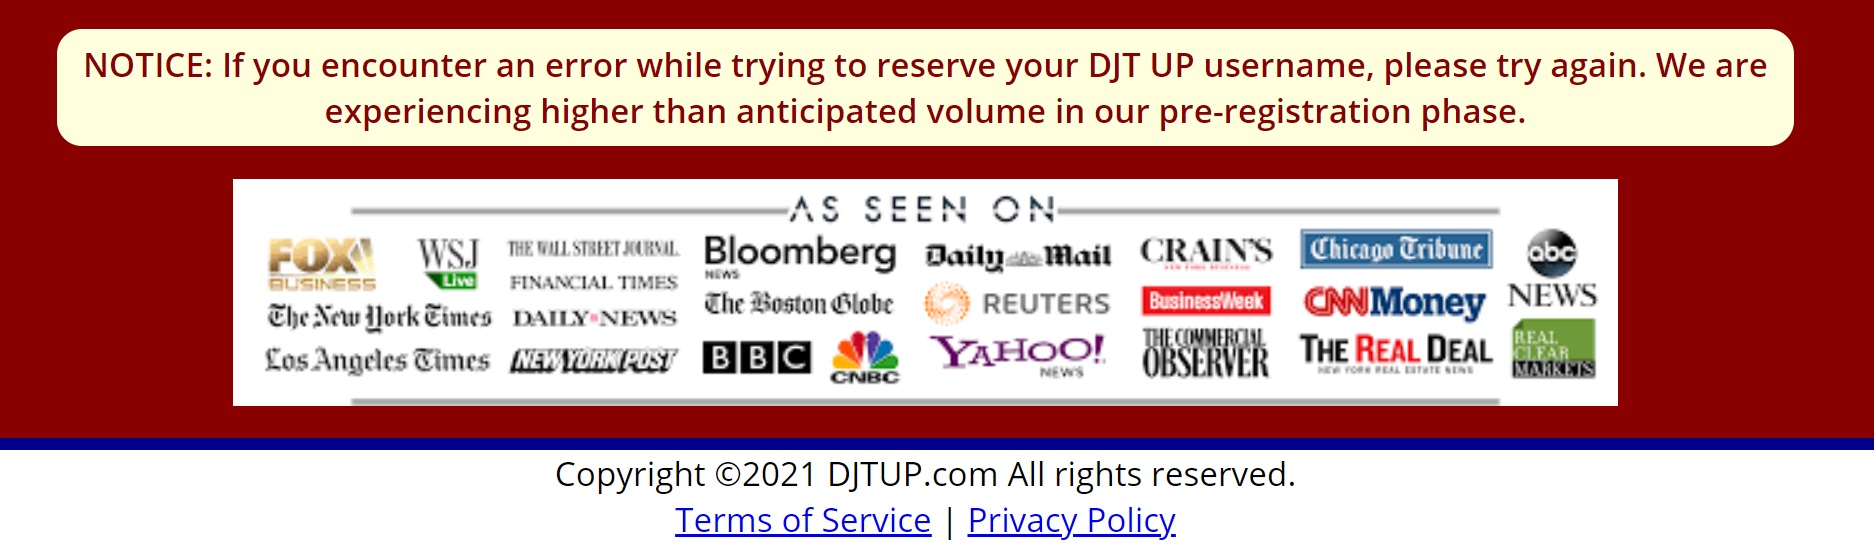 djtup AS SEEN ON